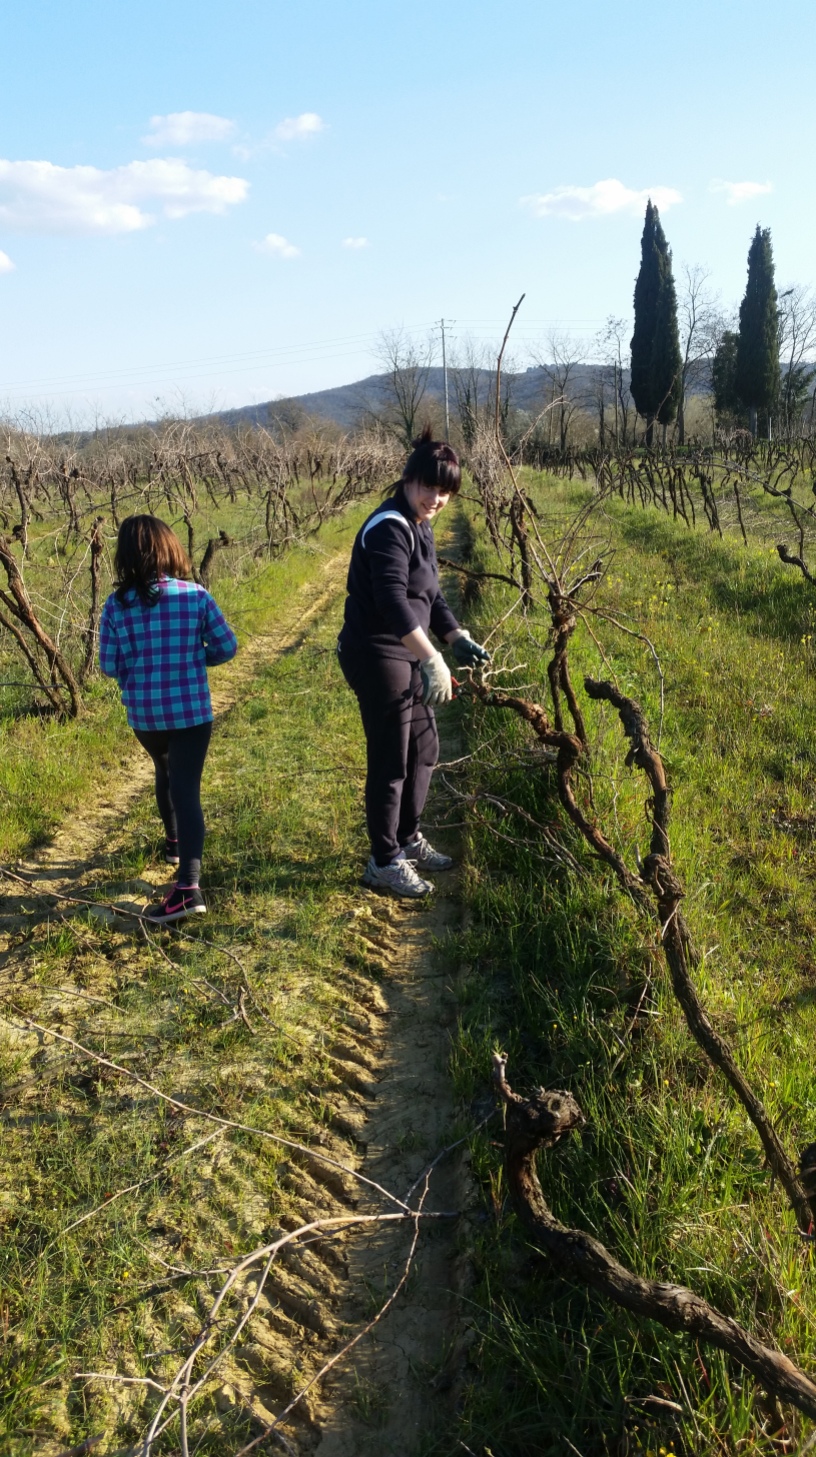 Marusca is working in the vineyard